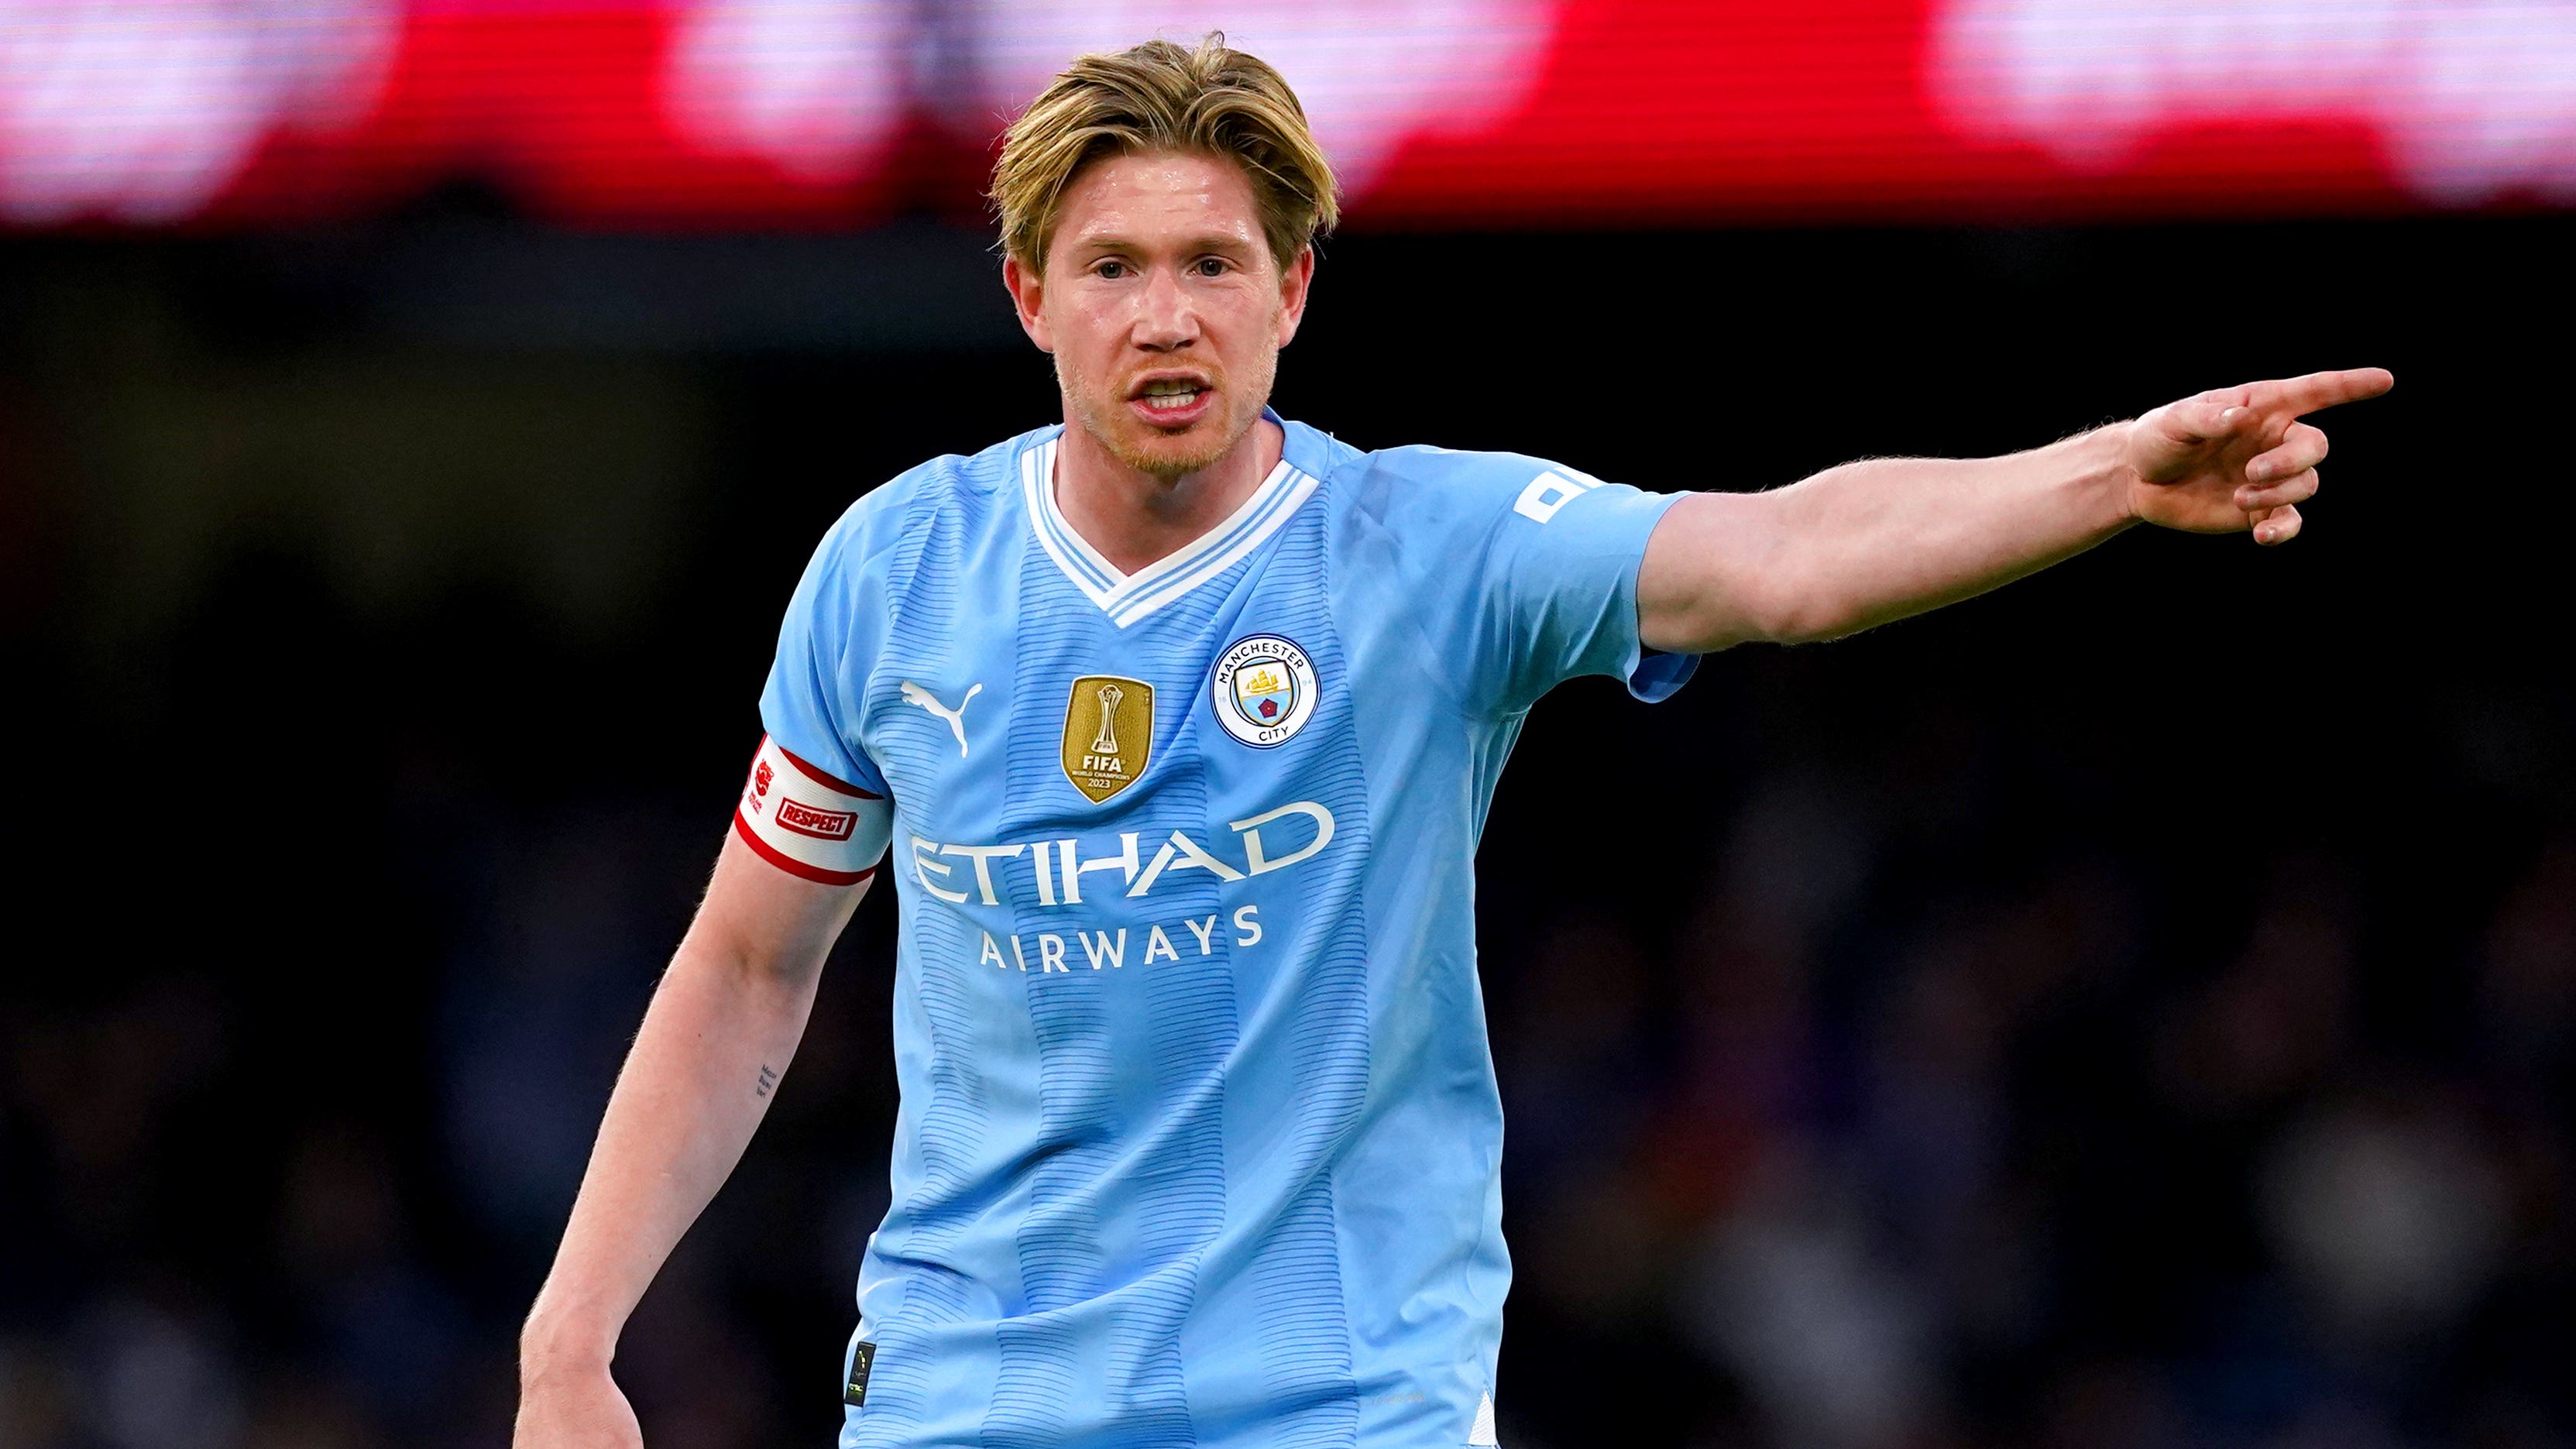 Kevin De Bruyne ‘still nowhere near where I need to be’ after injury return